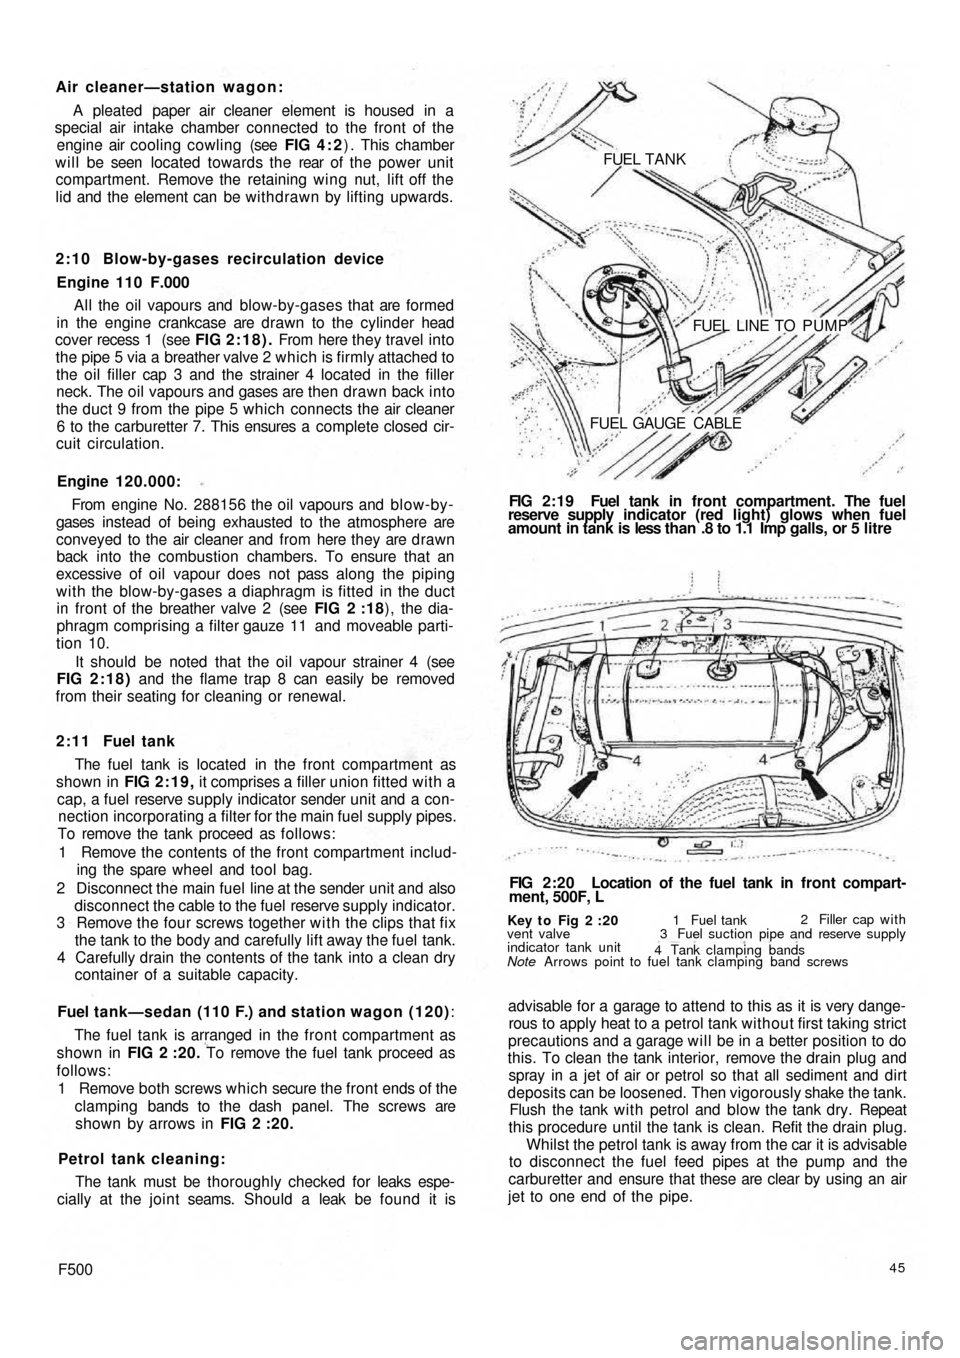 FIAT 500 1967 1.G Workshop Manual Air cleaner—station wagon:
A pleated paper air cleaner element is housed  in a
special air intake chamber connected to the front of the
engine air cooling cowling (see FIG 4 : 2) . This chamber
will